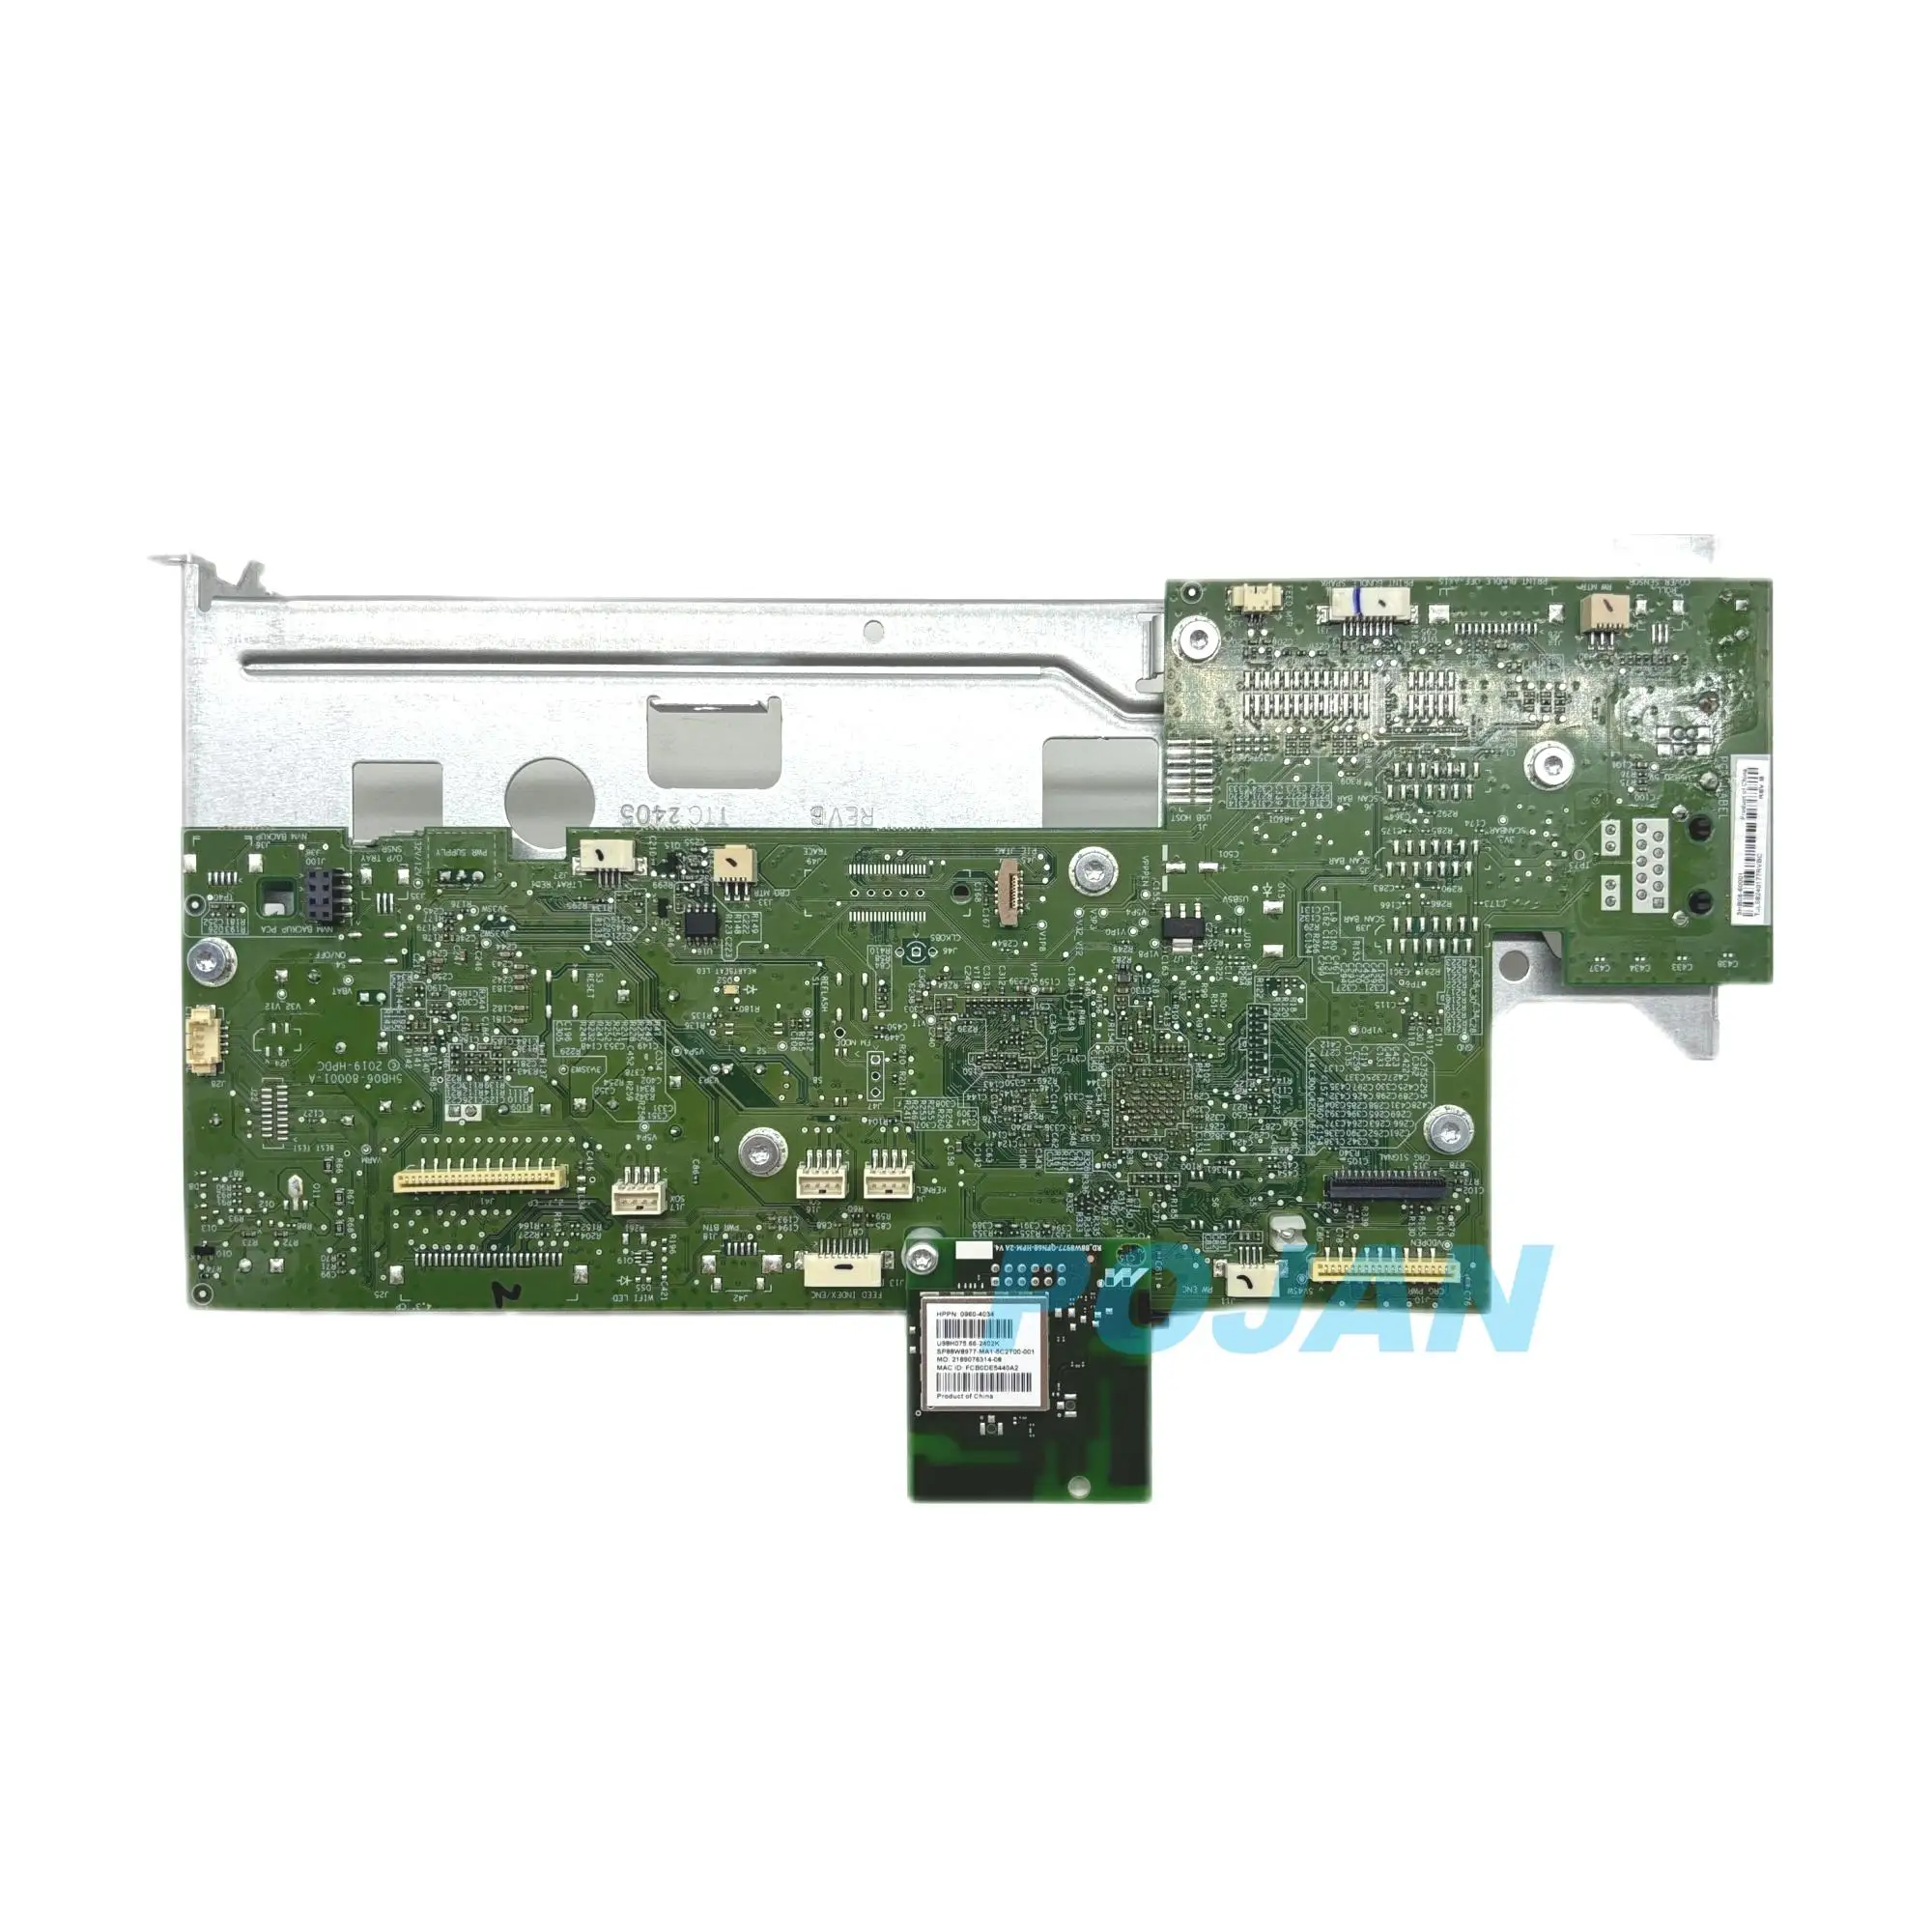 5HB06-67018 Main PCA Board Fit For H -P Designjet T210 T230 T250 SPARK 24in New POJAN